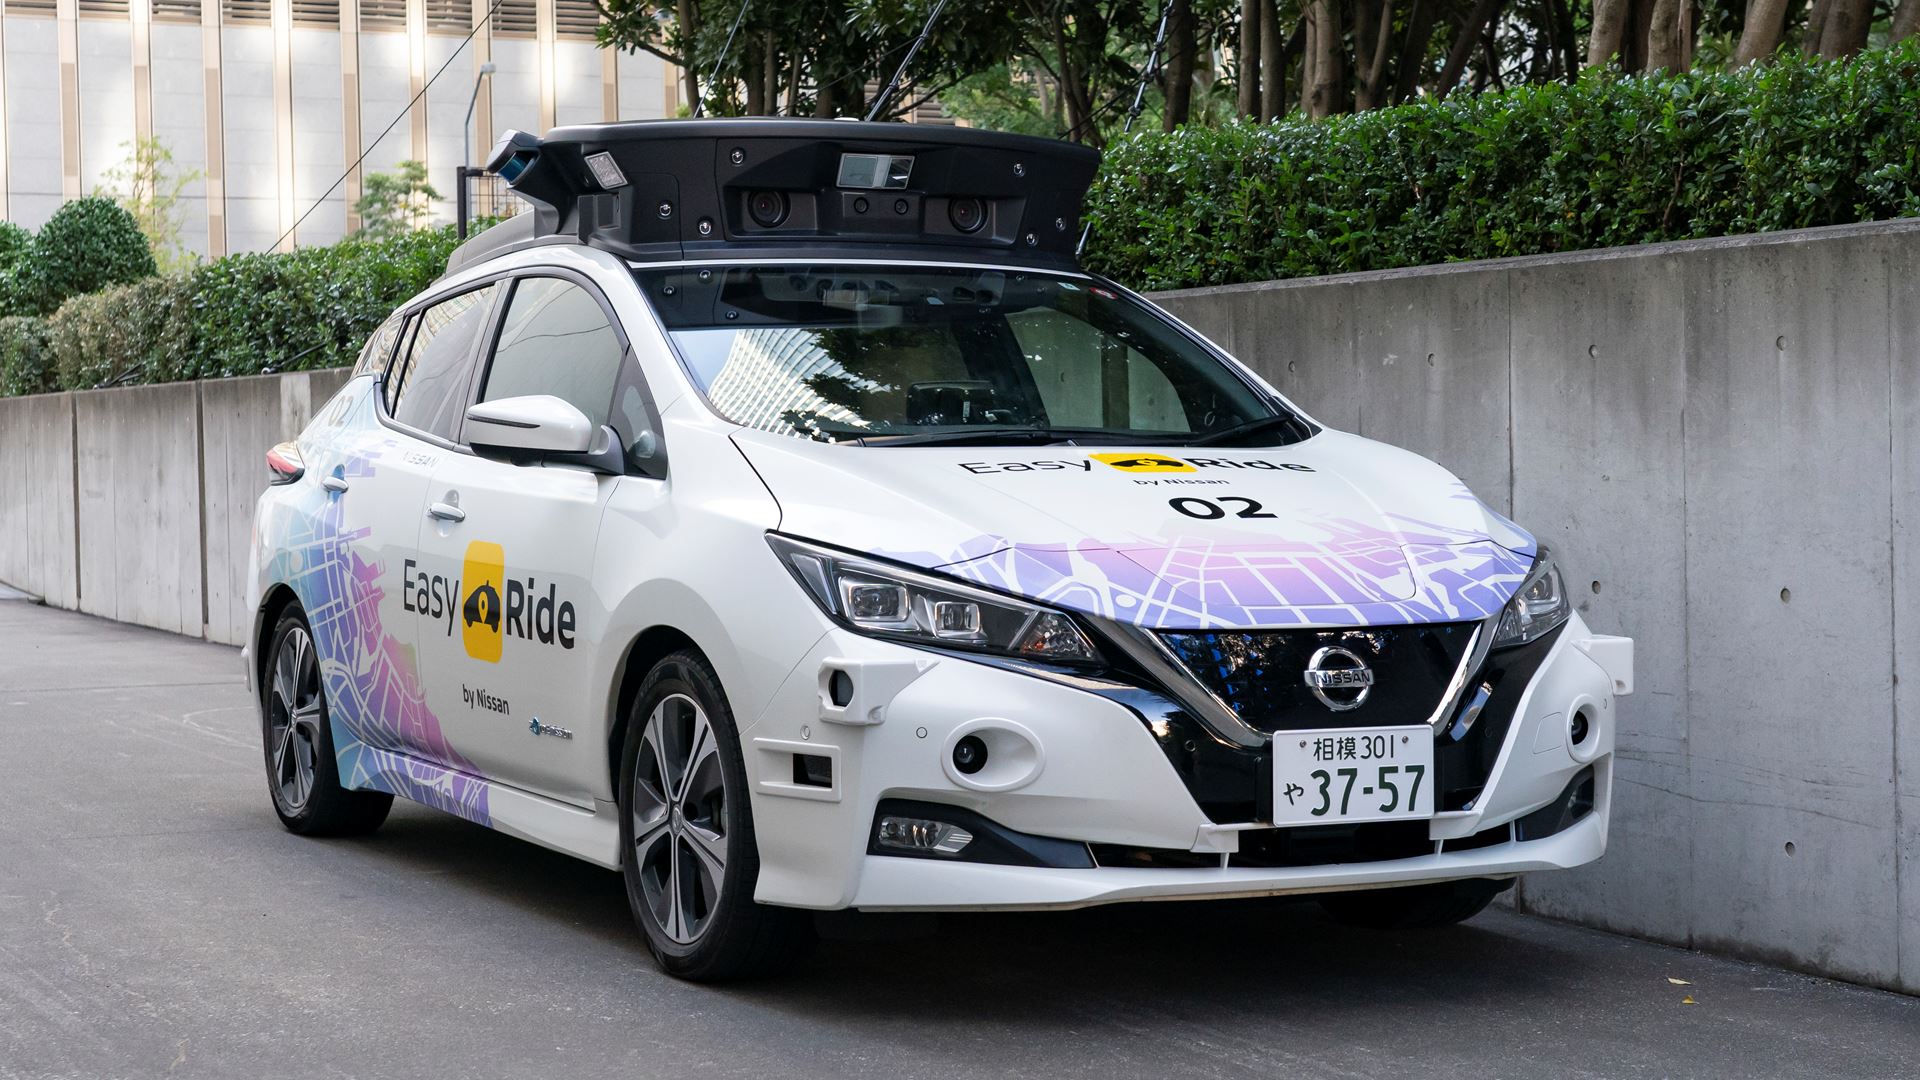 Nissan to Commercialise Autonomous Drive Mobility Services in Japan by 2027